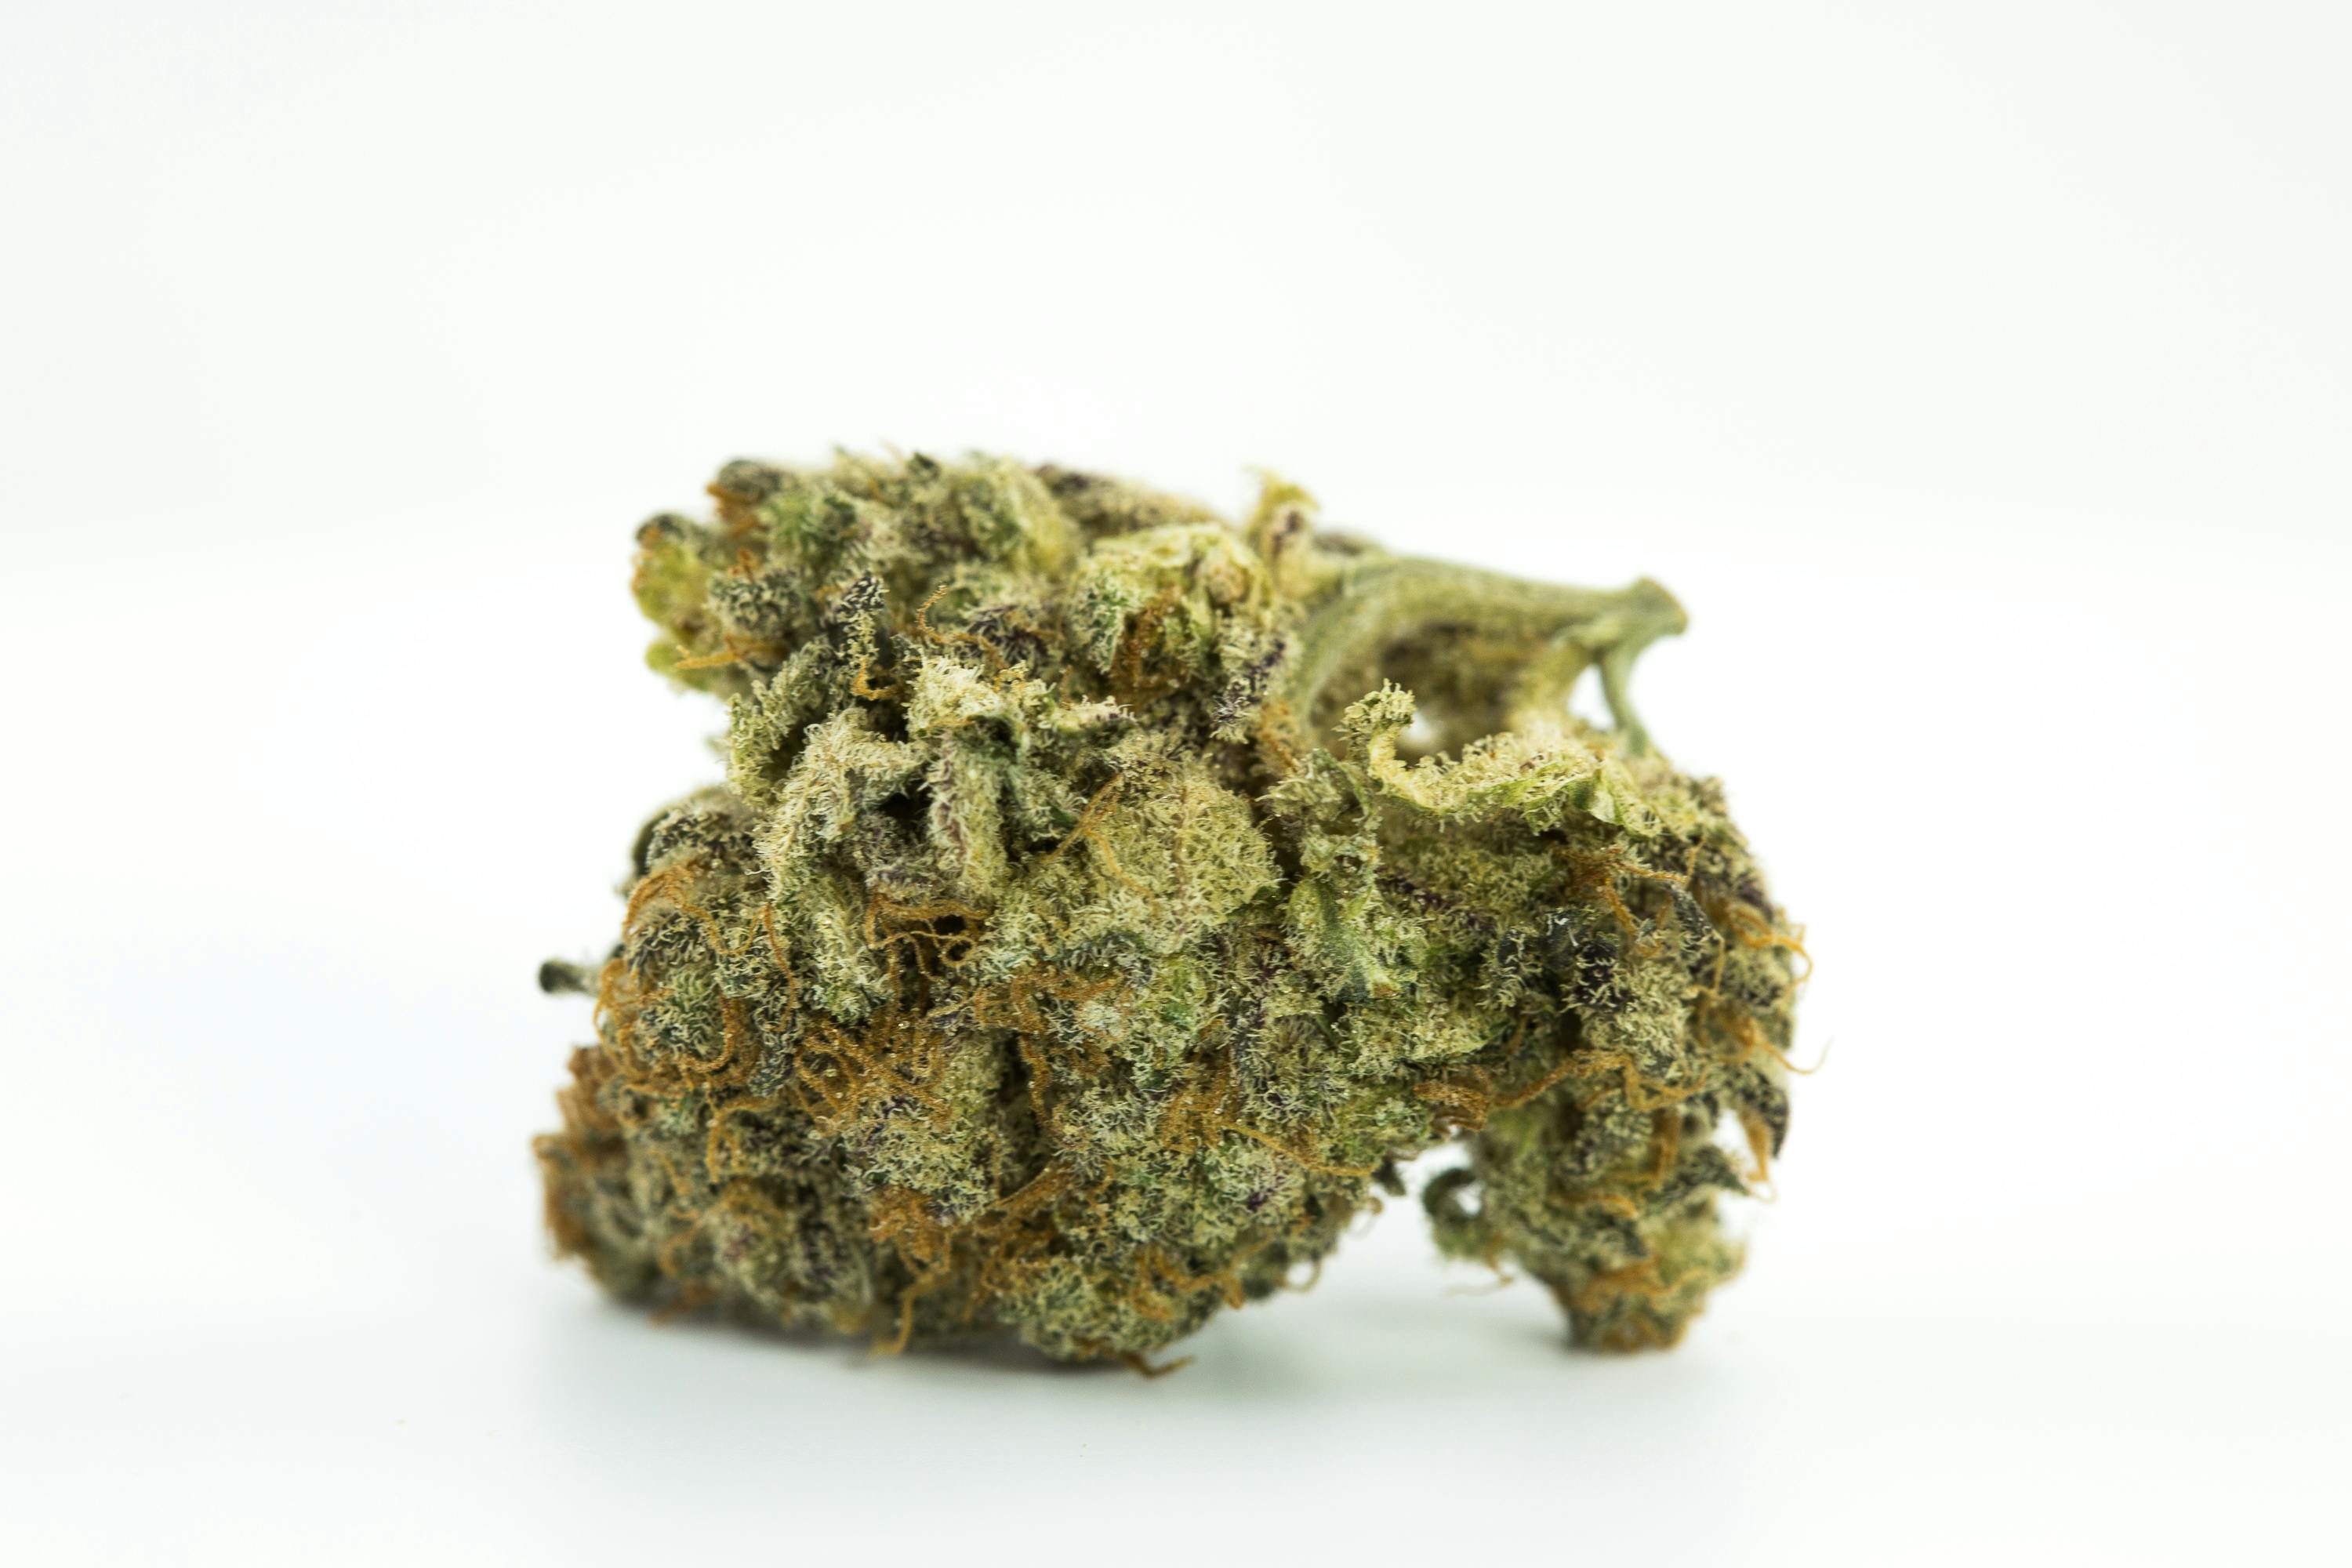 4Best Star Wars Strains To Take You To A Galaxy Far Far Away Best Star Wars Strains To Take You To A Galaxy Far, Far Away